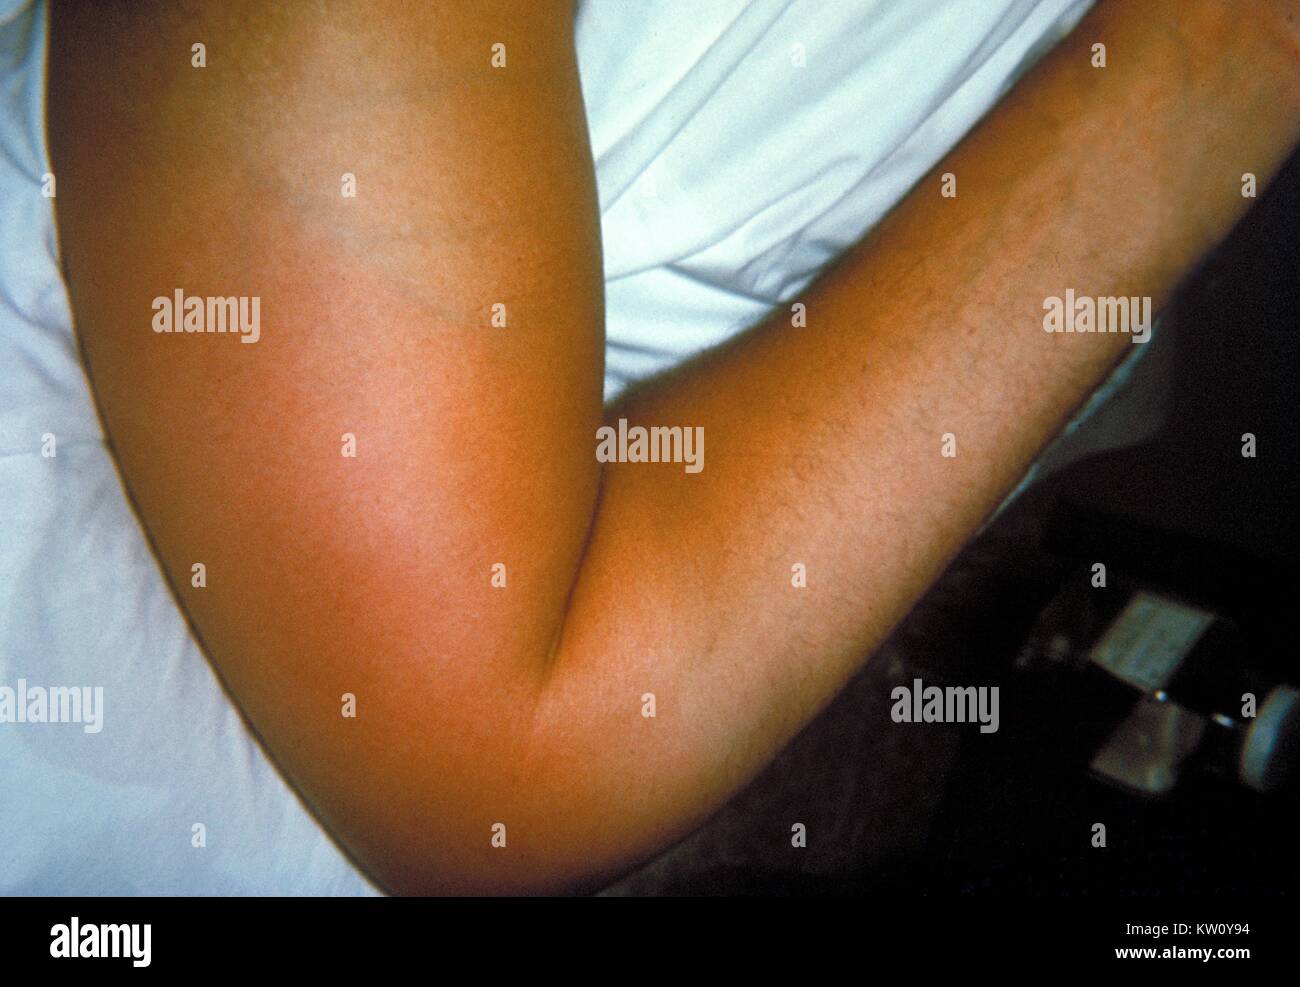 Right elbow of a patient with group B Streptococcus (GBS) bacteremia, with localized edema and erythema. Here the GBS bacteria have entered the blood stream and migrated to the subcutaneous tissues of the right elbow causing localized erythema and edema. Image courtesy CDC/Emory University, Dr. Thomas Sellers, 1964. Stock Photo